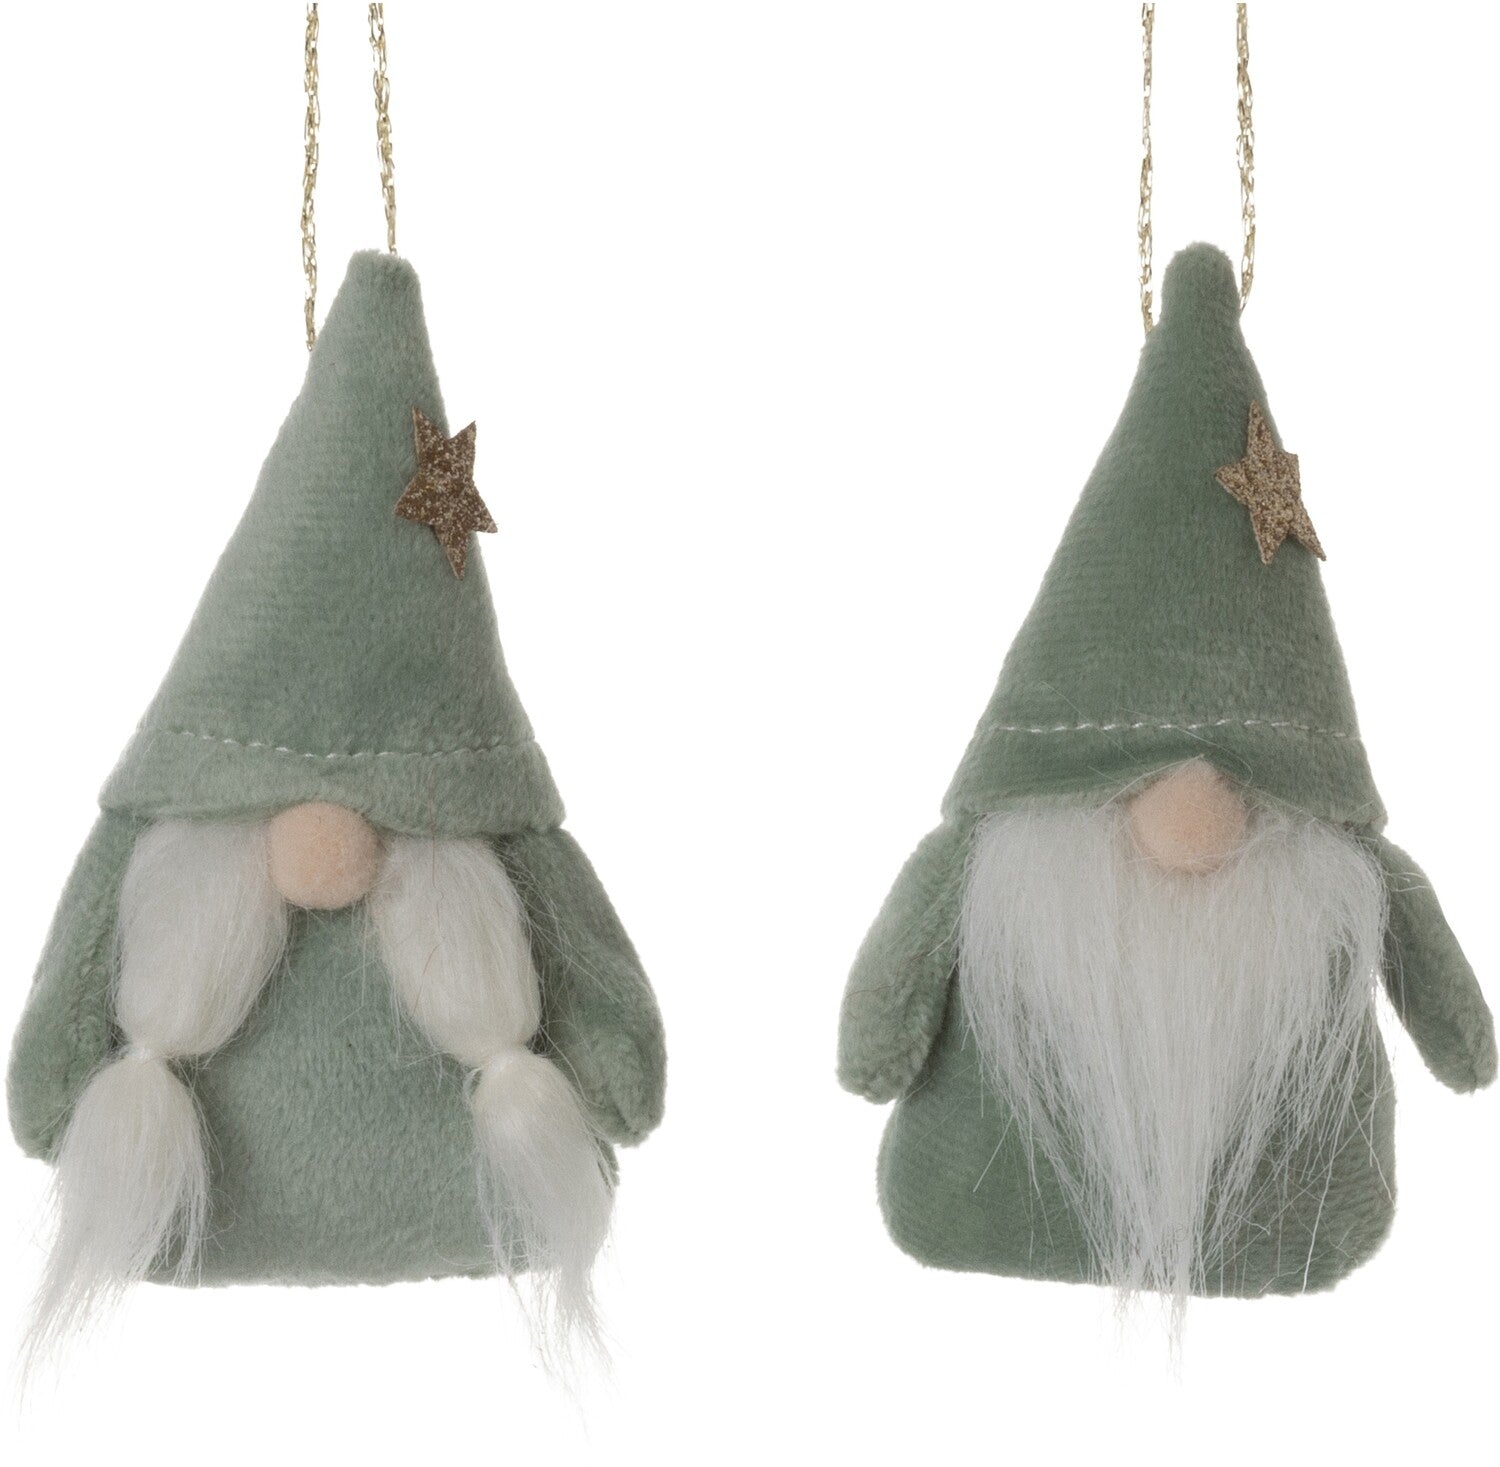 Assorted Gnome Ornament, INDIVIDUALLY SOLD